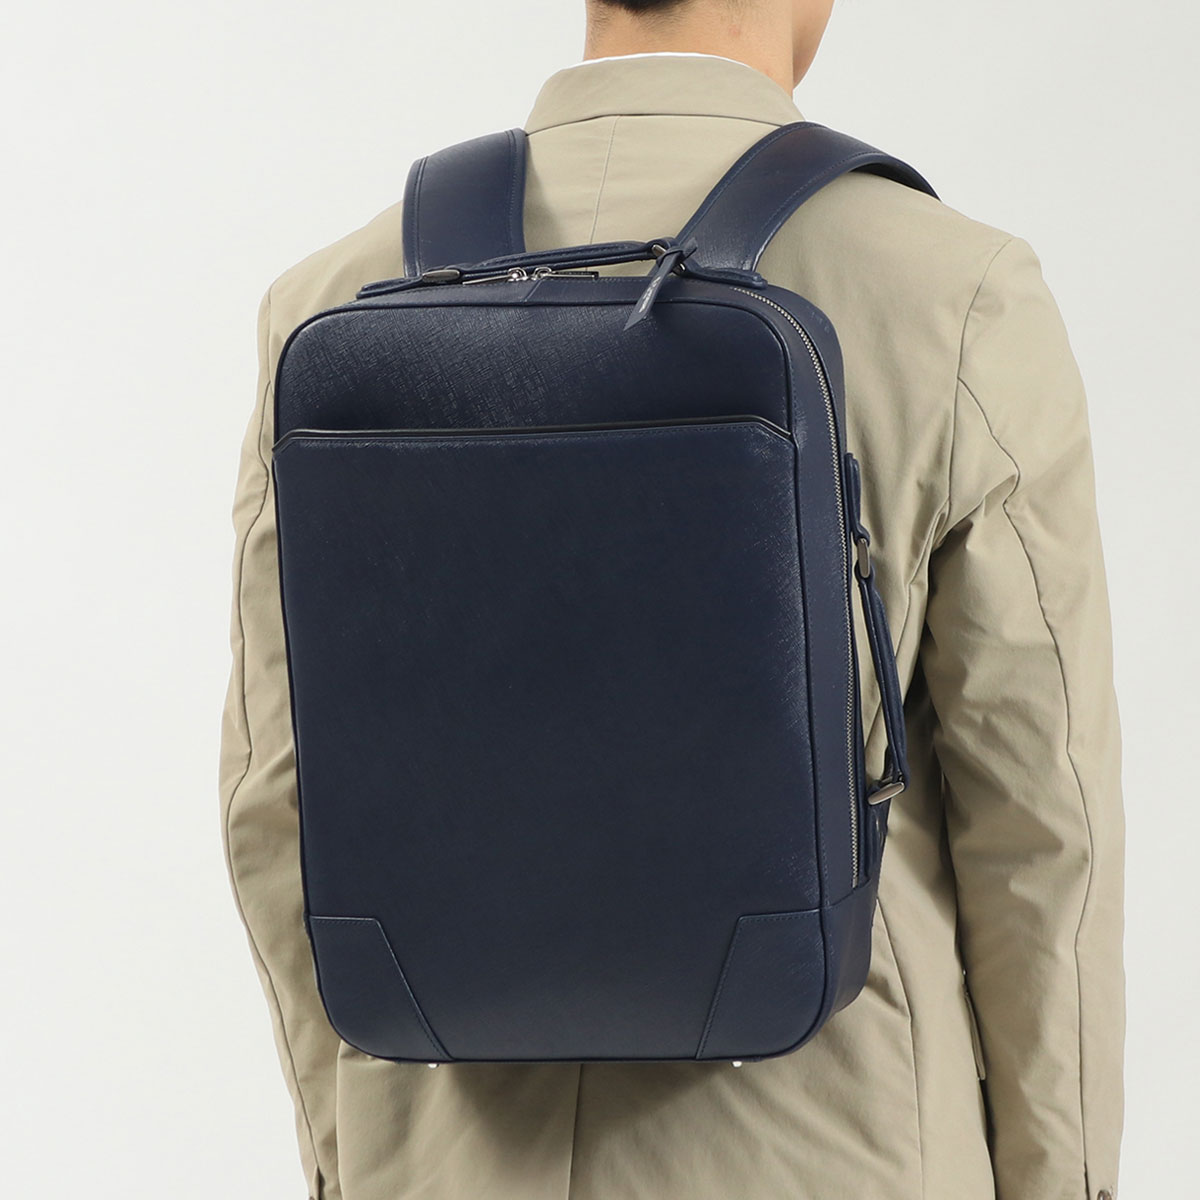 ST.UNIVERSEL セントユニバーセル SAFFIANO BUSINESS BACKPACK 